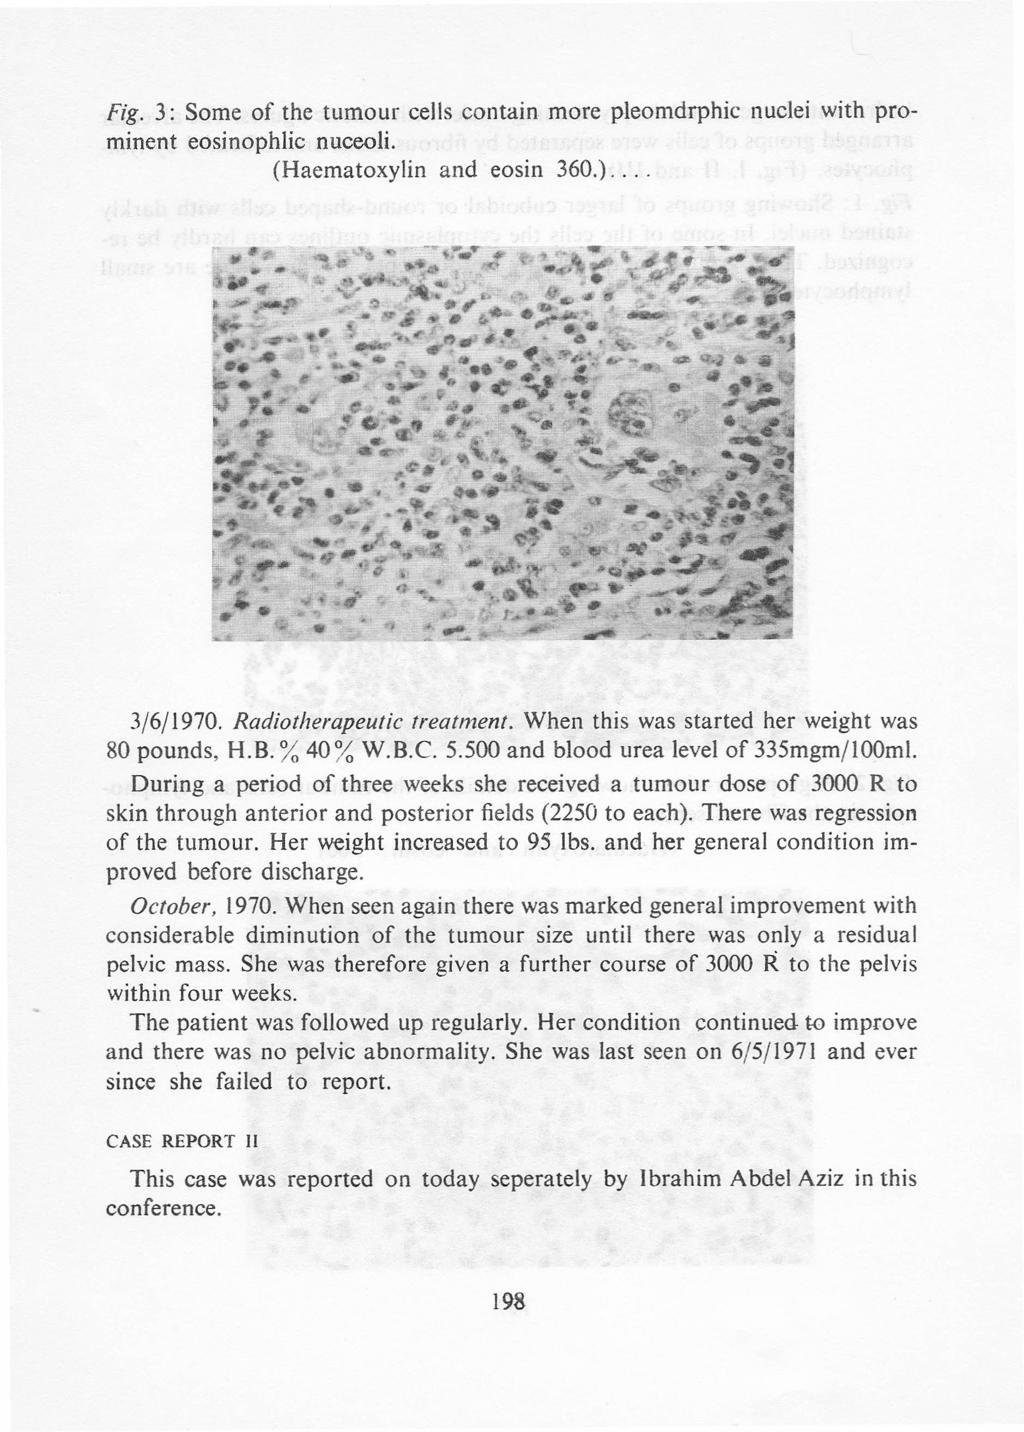 Fig. 3: Some of the tumour cells contain more pleorndrphic nuclei with prominent eosinophlic nuceoli. (Haematoxylin and eosin 360.)... 3/6/1970. Radiotherapeutic treatment.